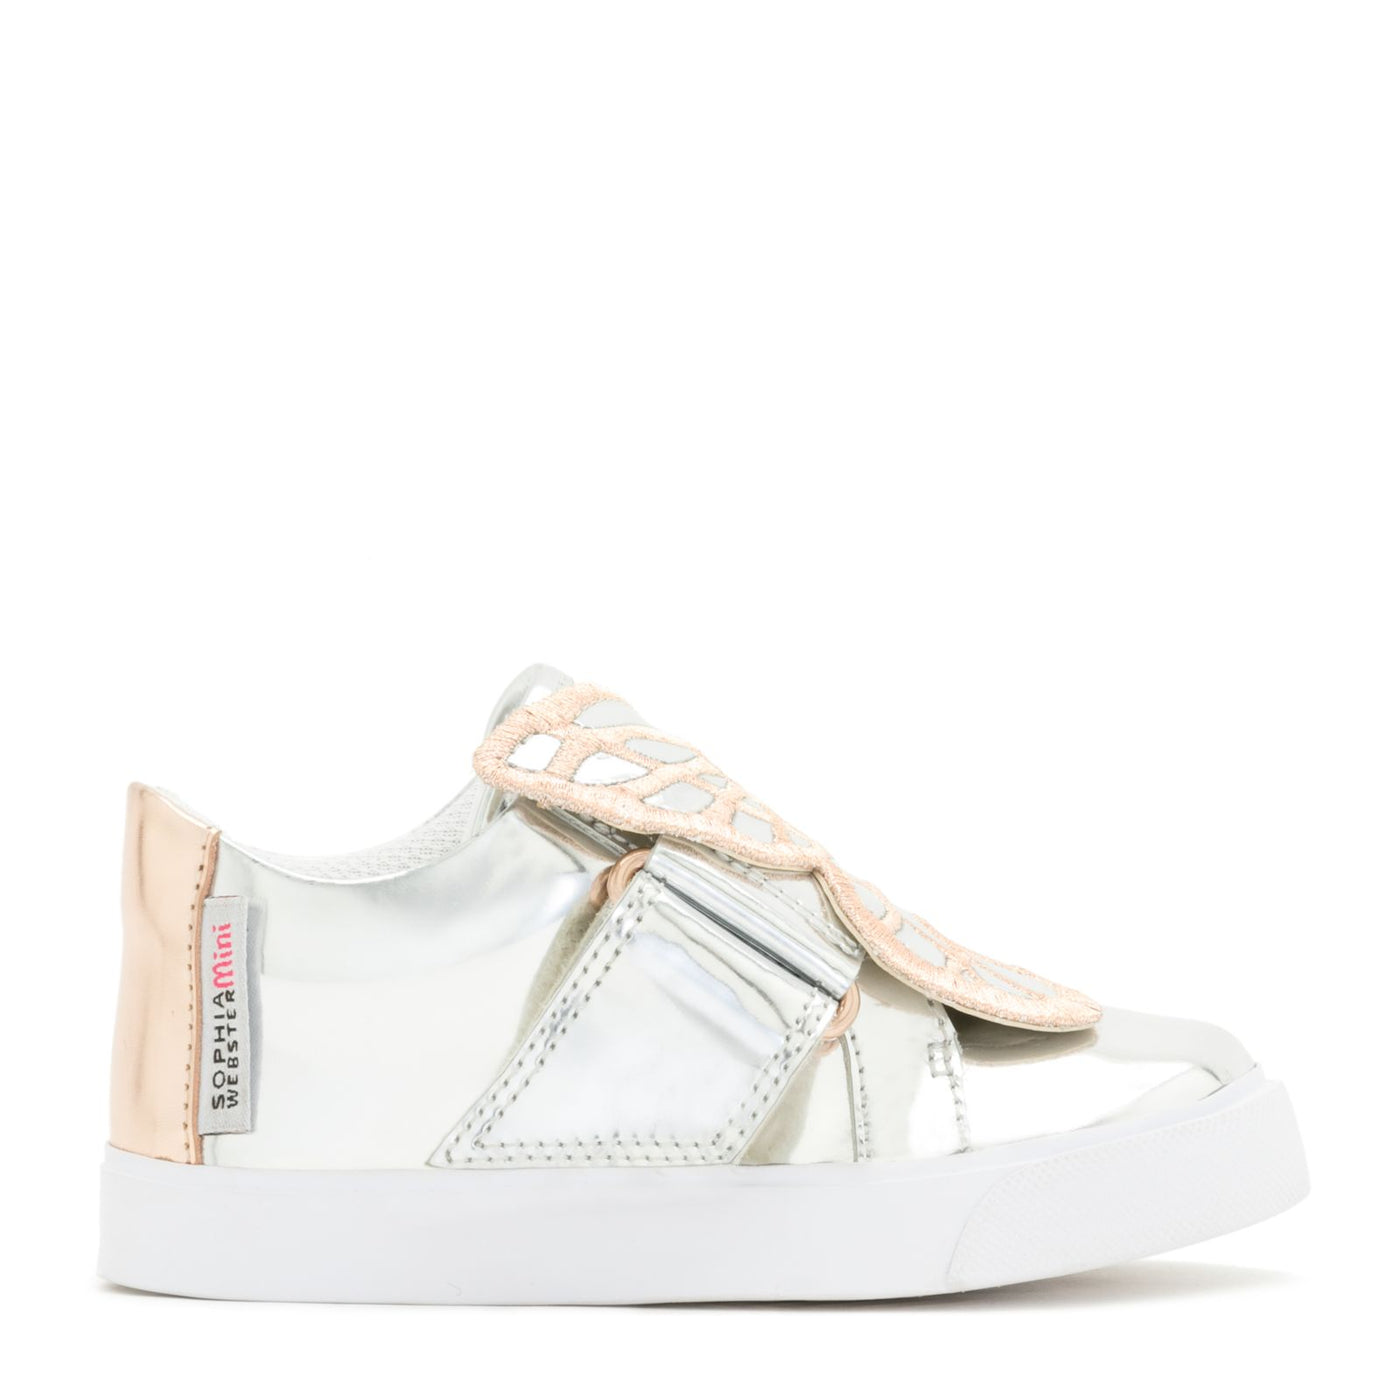 BUTTERFLY LOW TOP INFANT Silver & Rose Gold